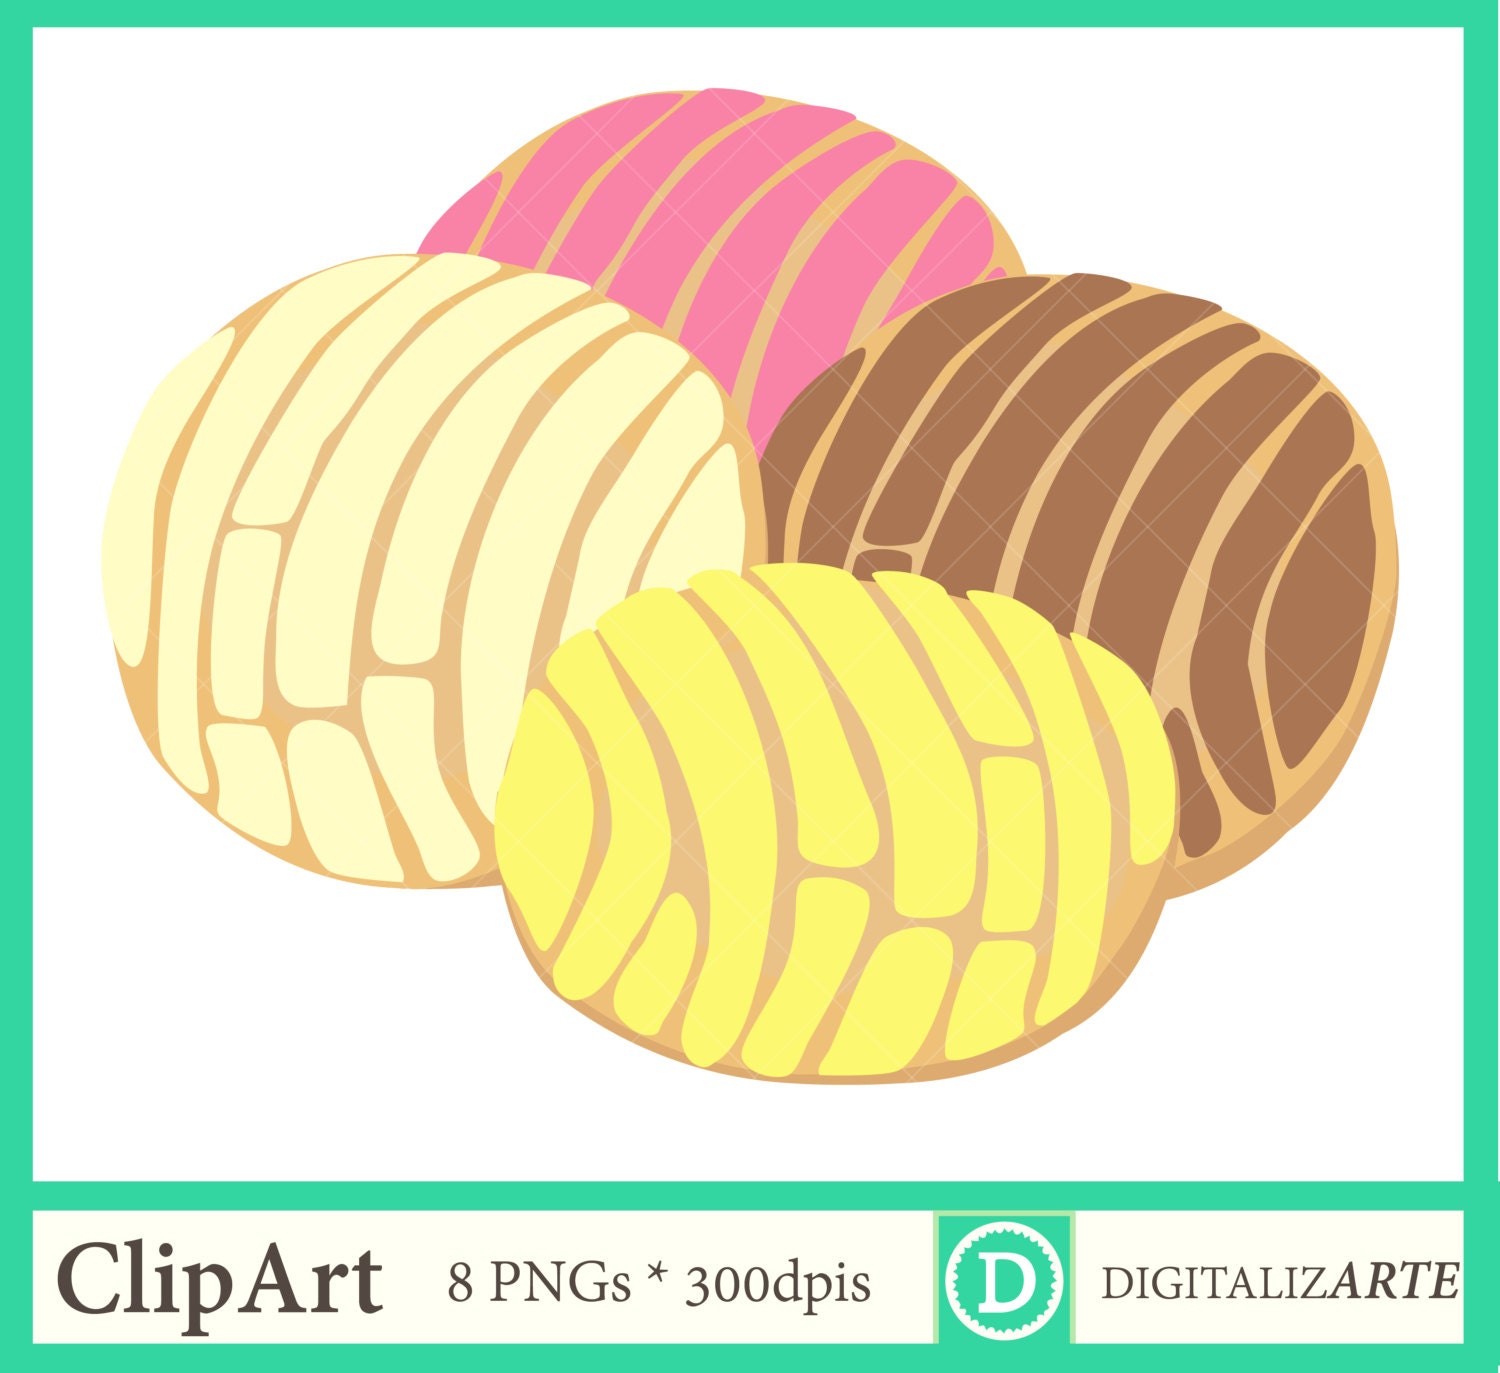 Download Conchitas 8 Clipart Set. Pan Dulce Mexican Pastries. | Etsy